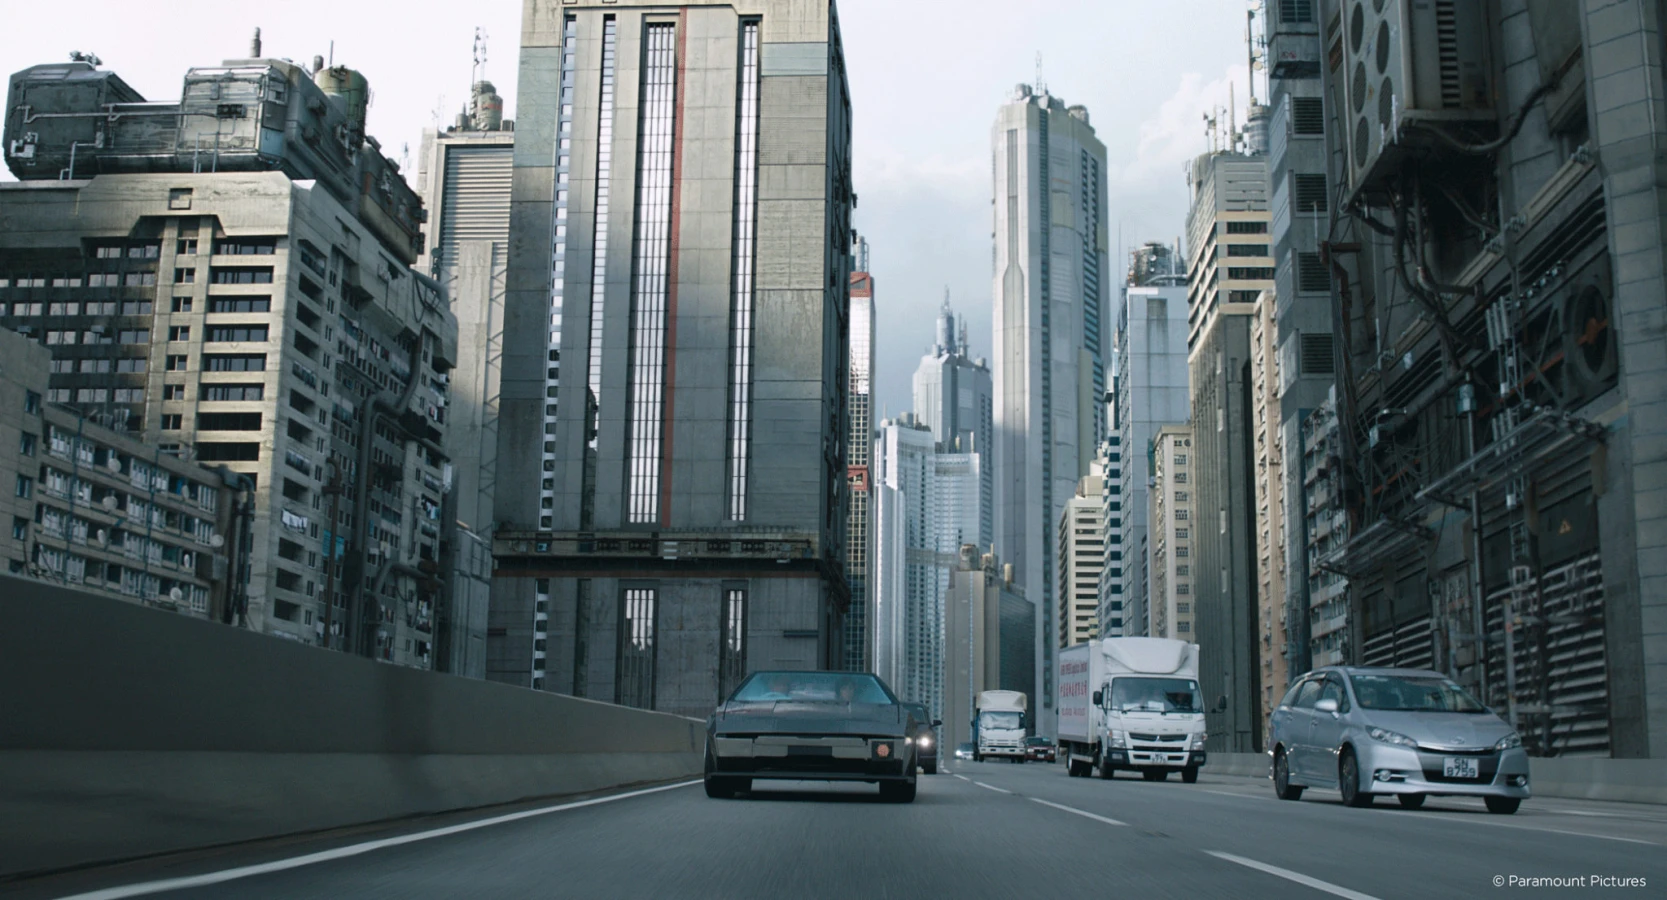  Ghost in the shell skyscrapers view on road shot from Raynault vfx 